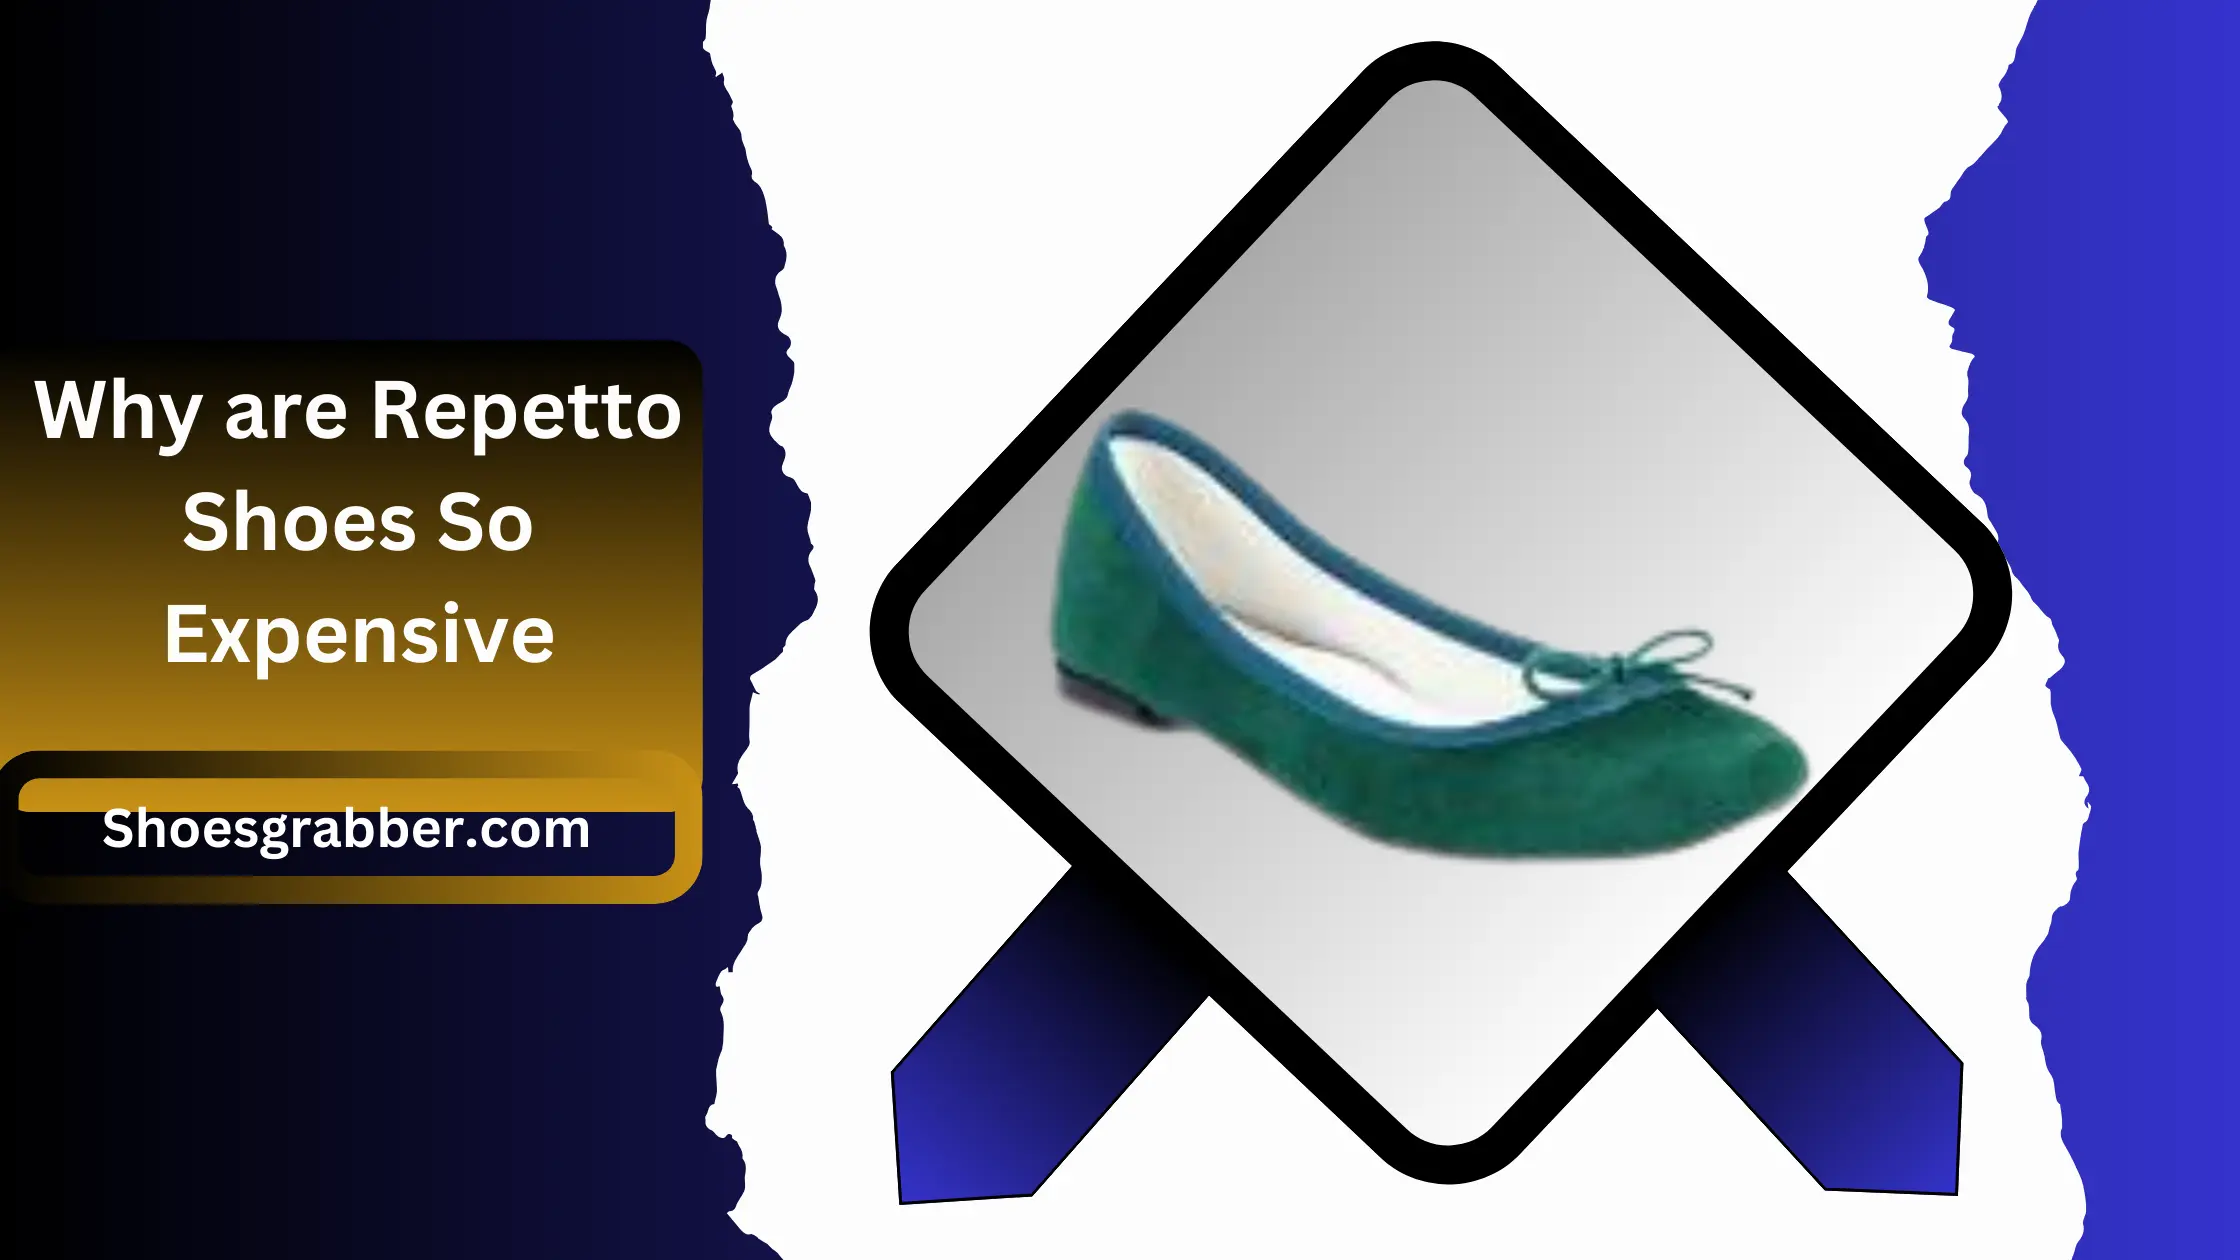 Why are Repetto Shoes So Expensive - Digging Into the Details